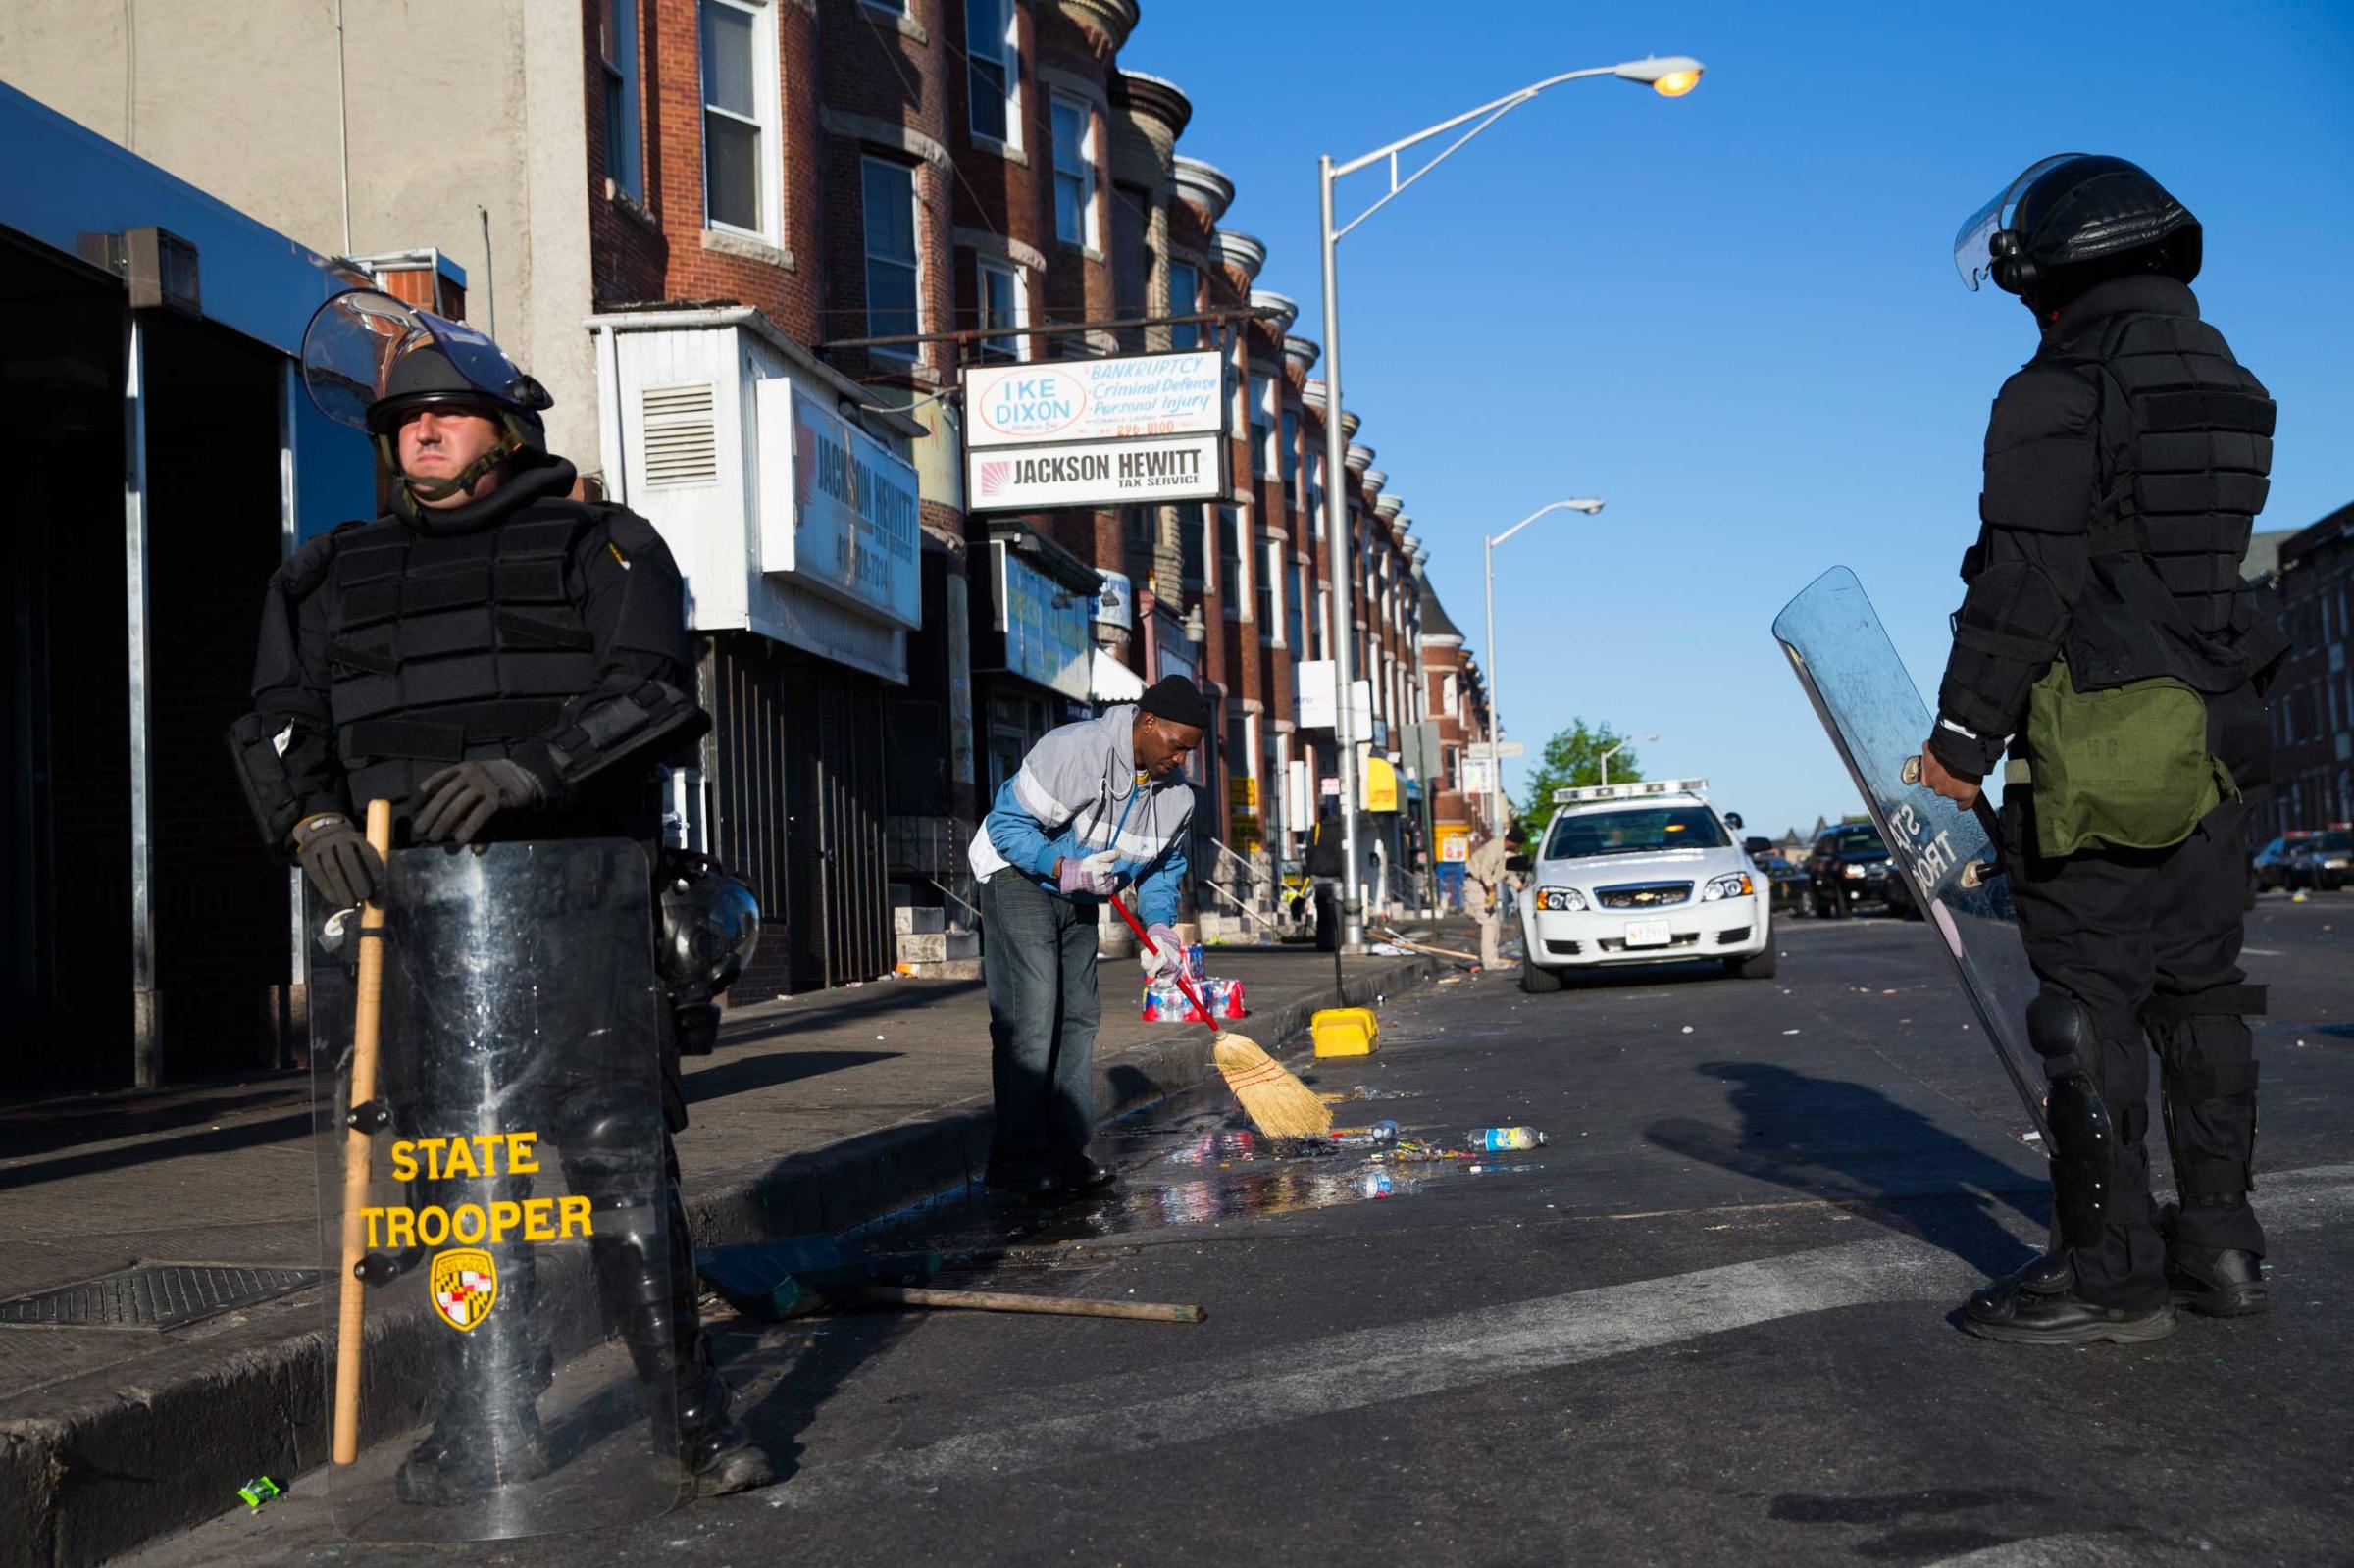 Maryland state troopers stand guard as residents clean up after a night of riots in Baltimore on April 28, 2015.